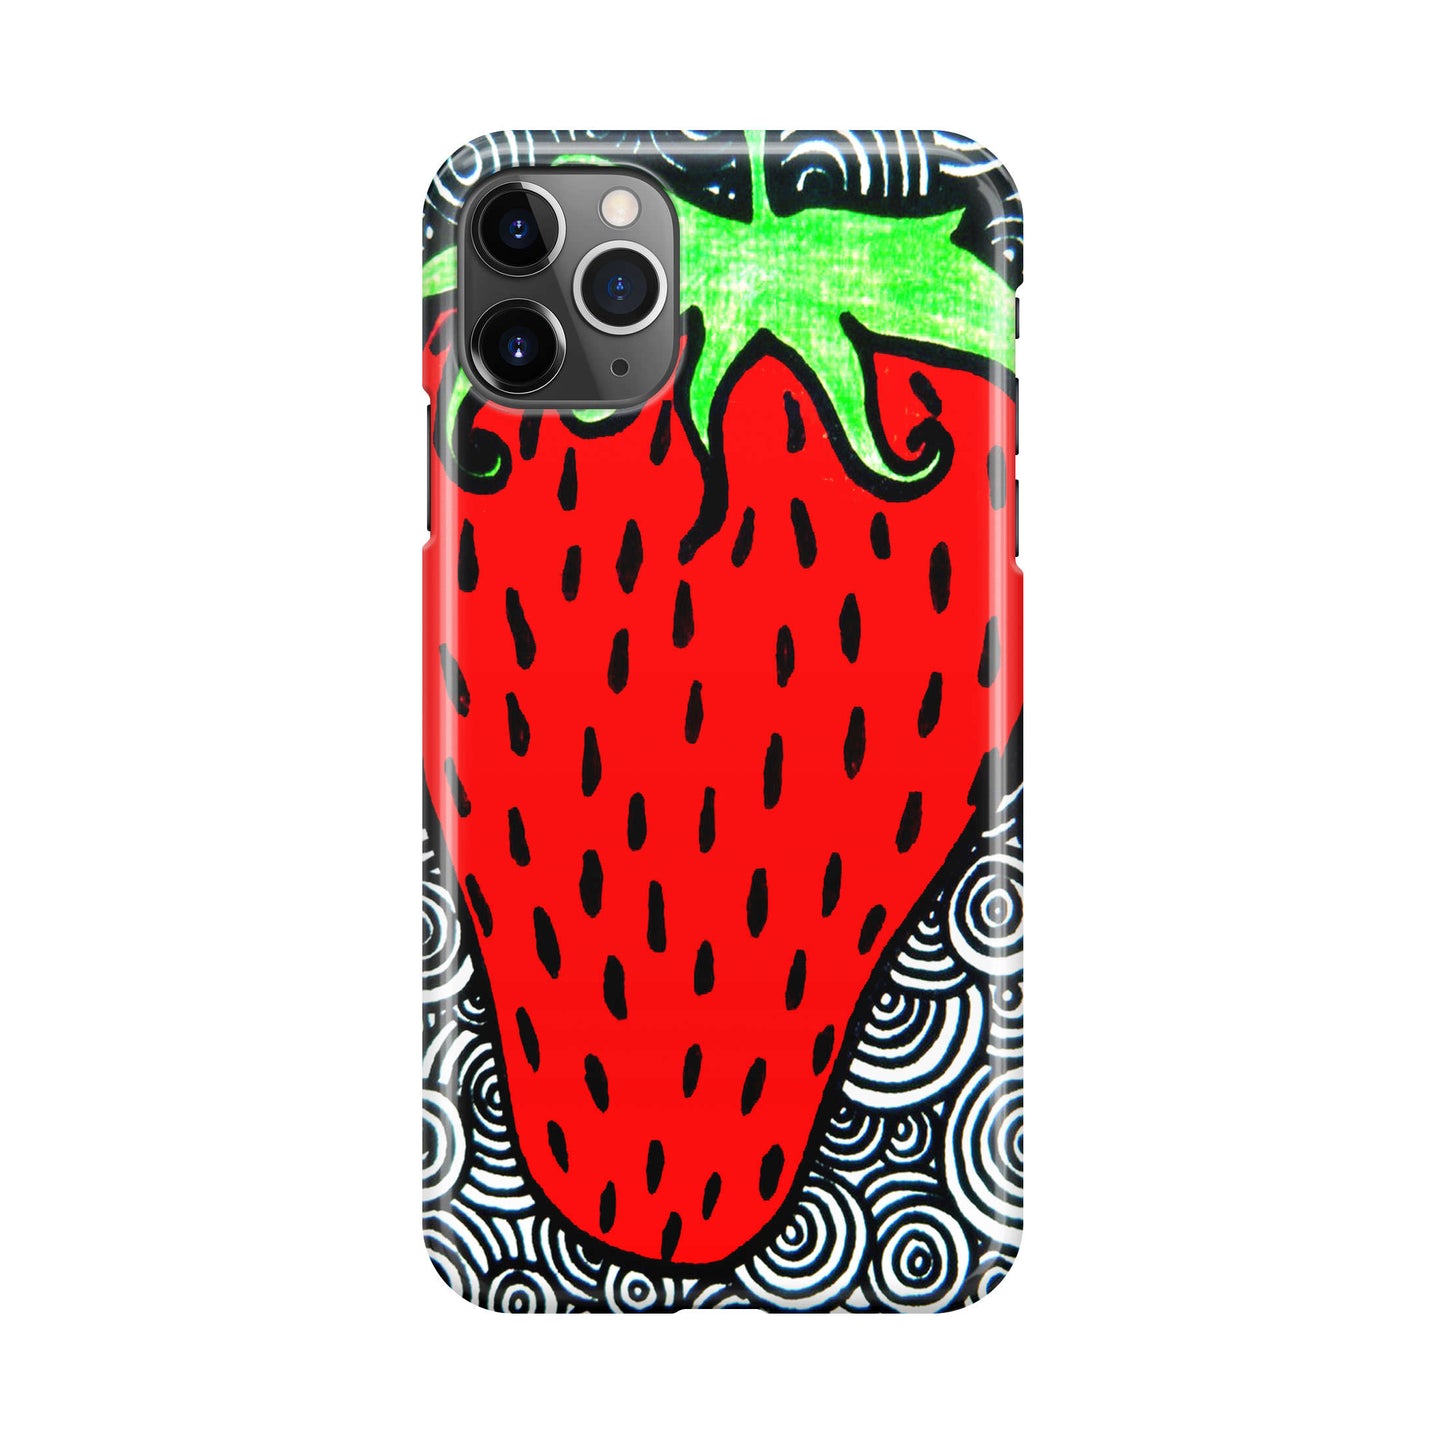 Strawberry Fields Forever iPhone 11 Pro Max Case